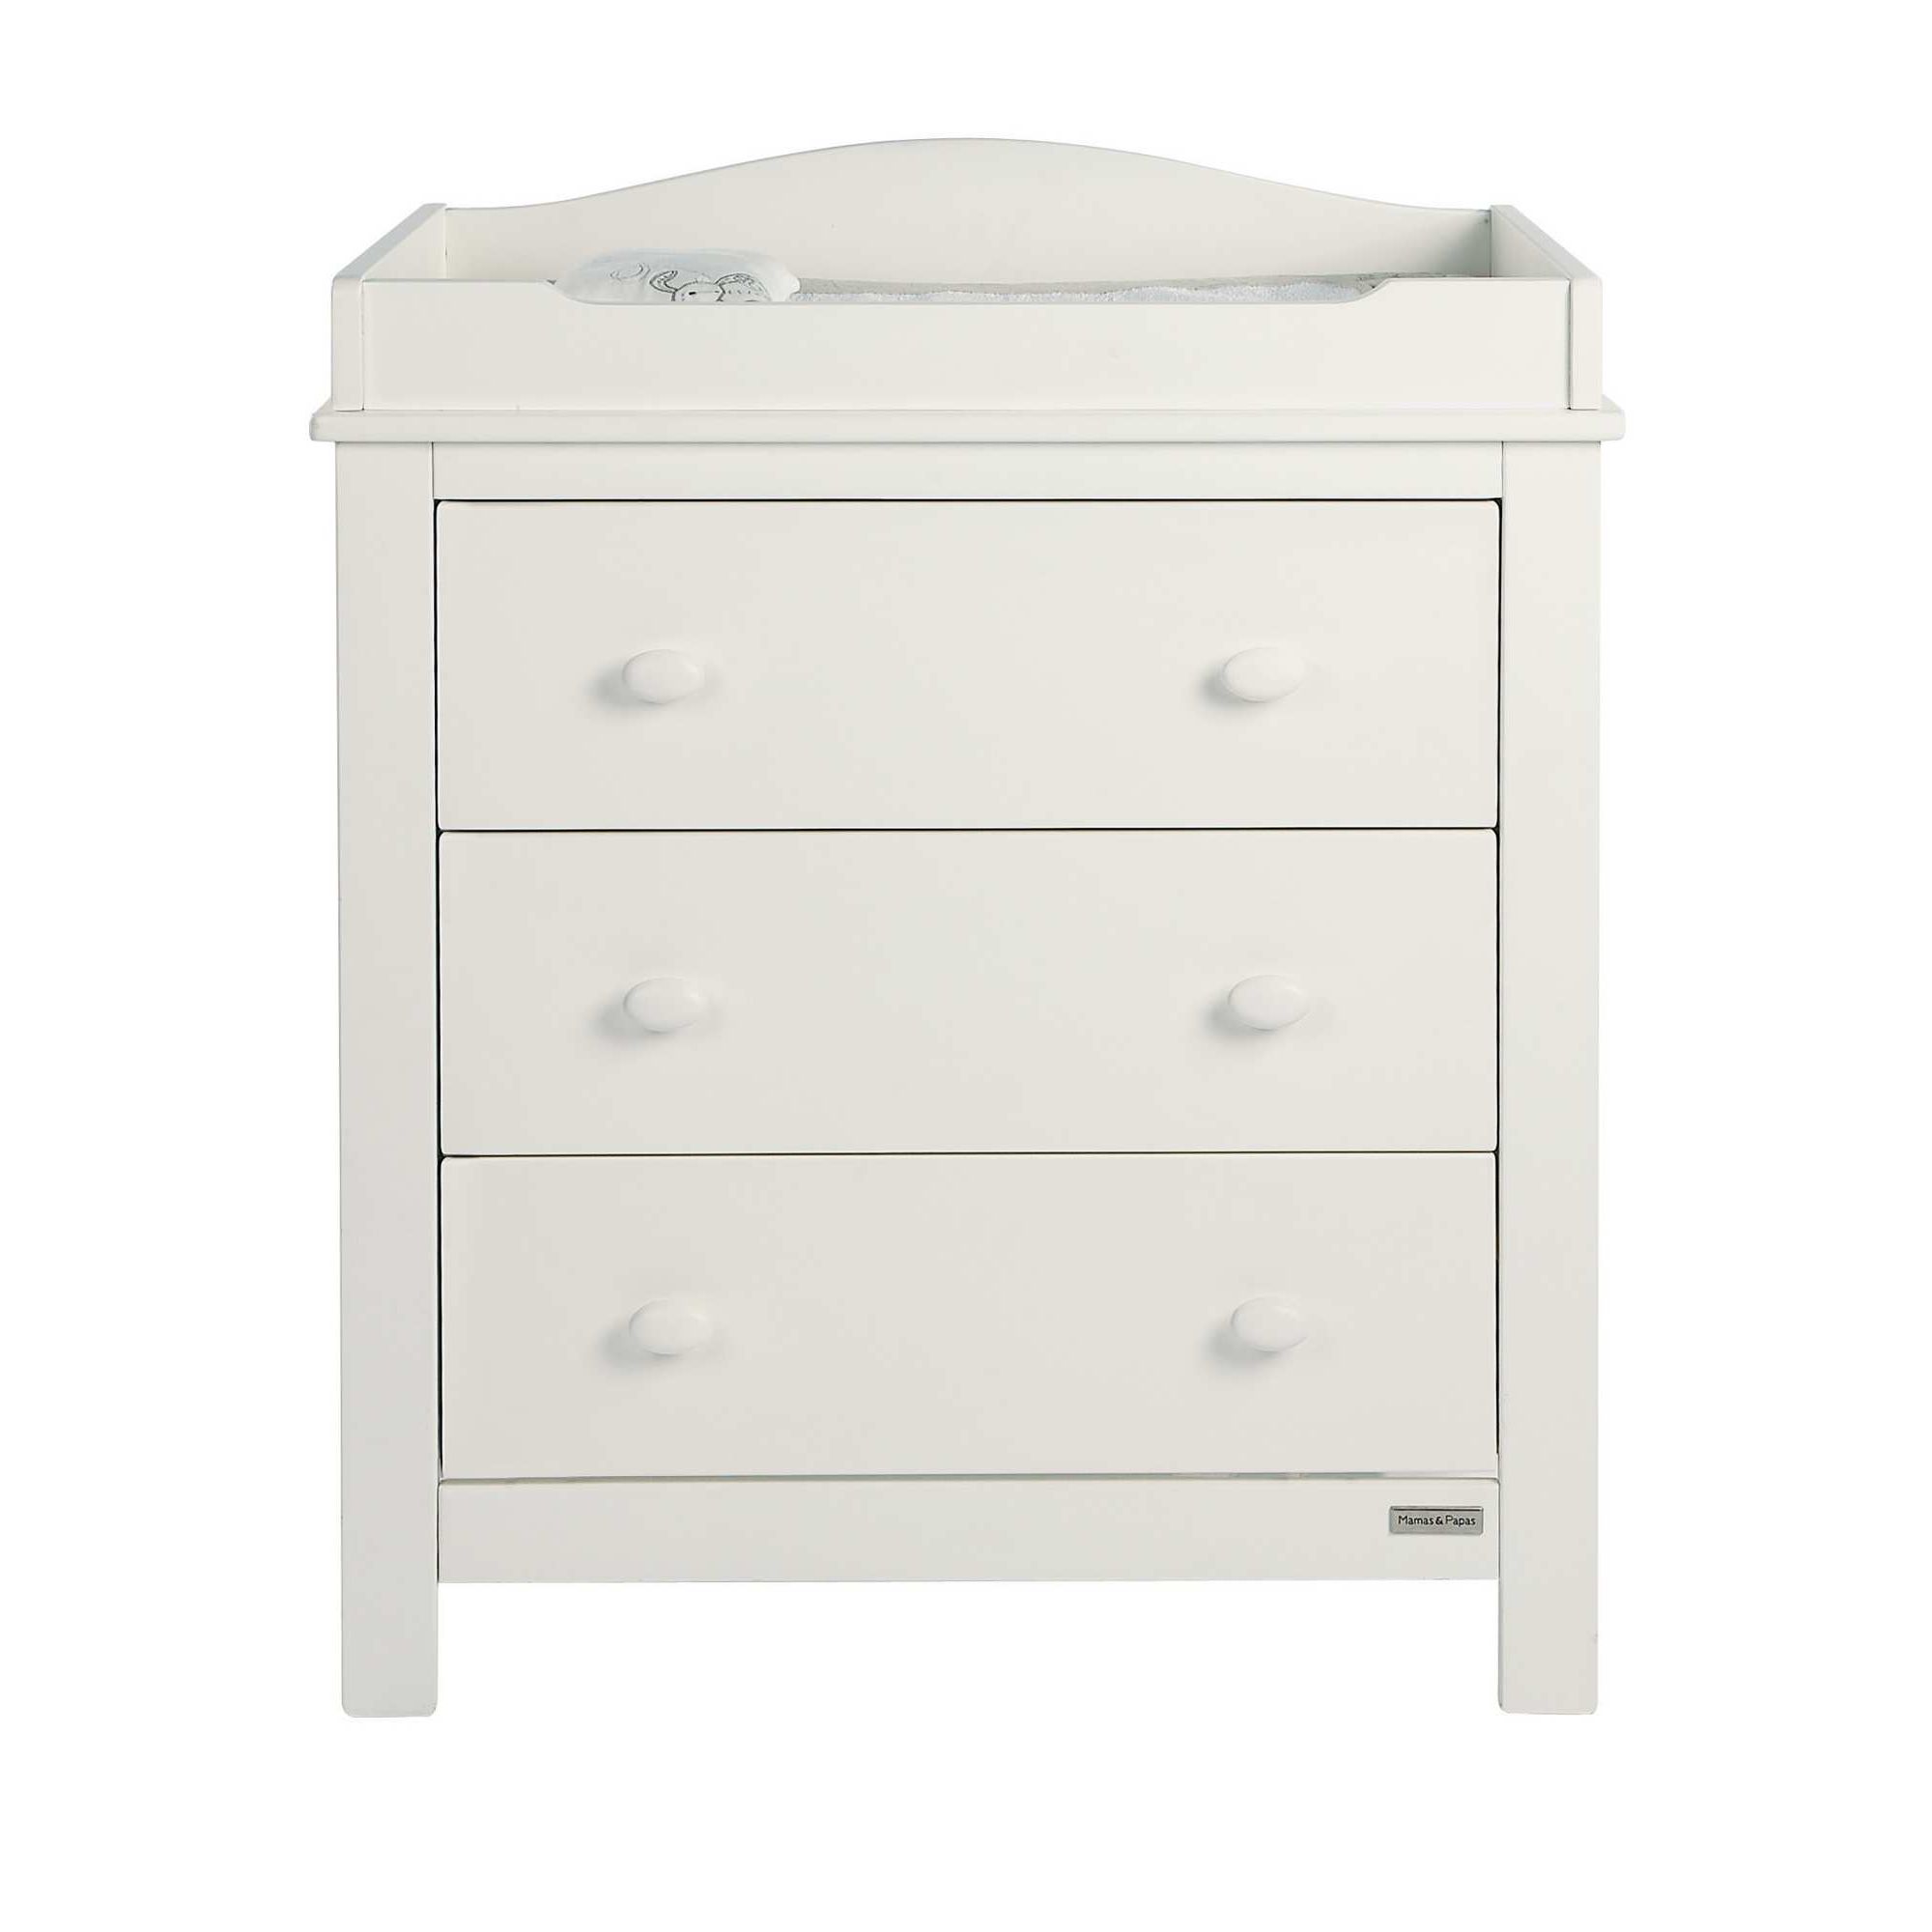 Mamas & Papas - Willow Dresser with changer - White at Tesco Direct